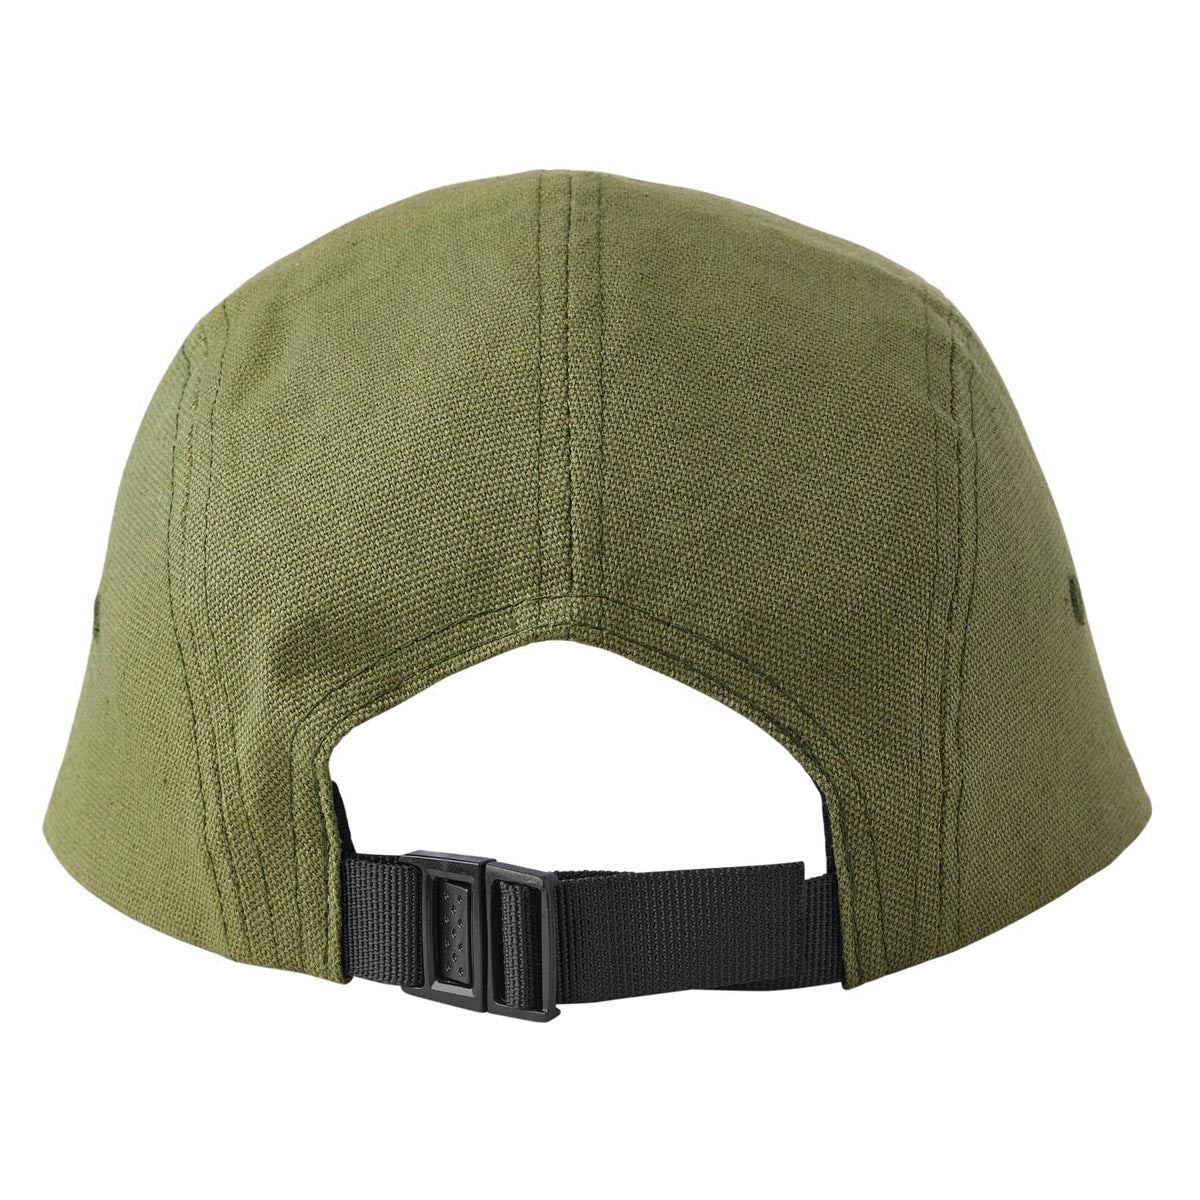 Independent Summit Scroll Camp Unstructured Hat - Army Green image 2